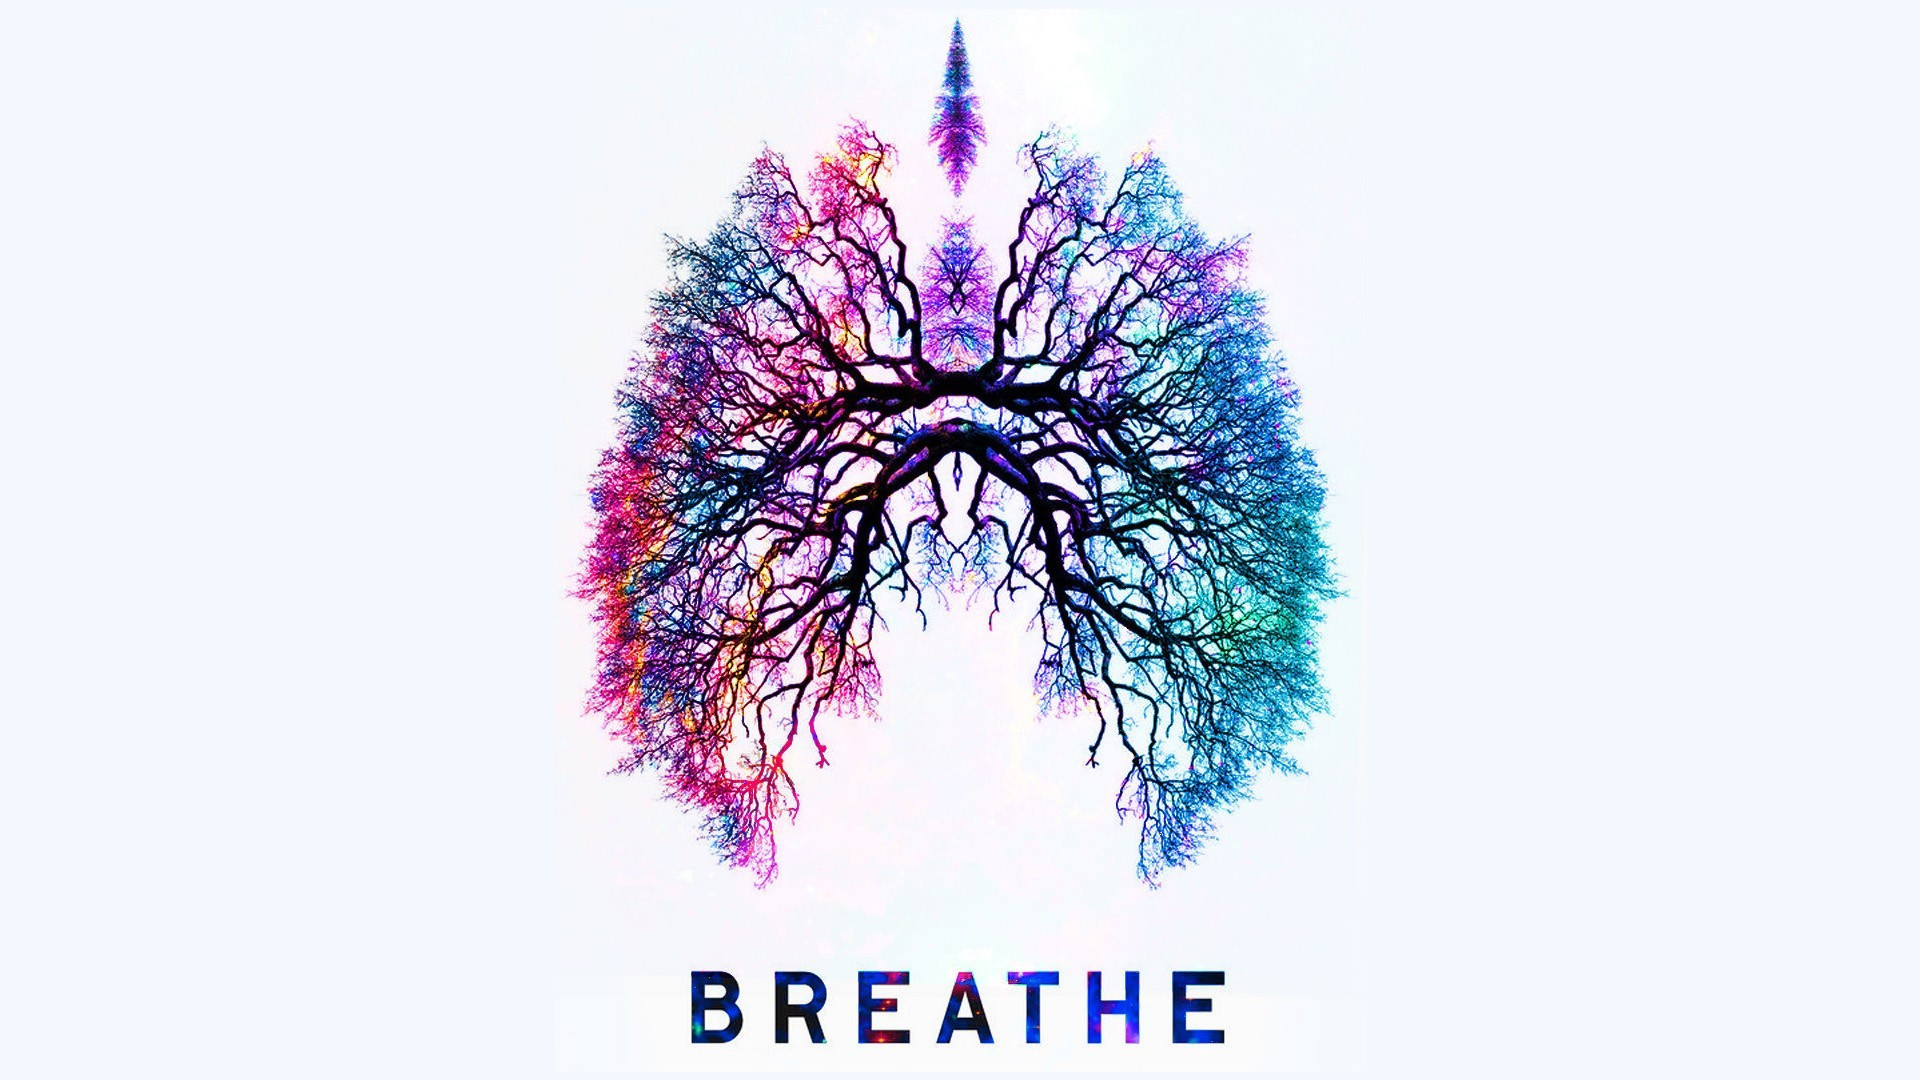 Holistic Health, Building Your Immune System and the Power of Breath with the Founder of Soma Breath